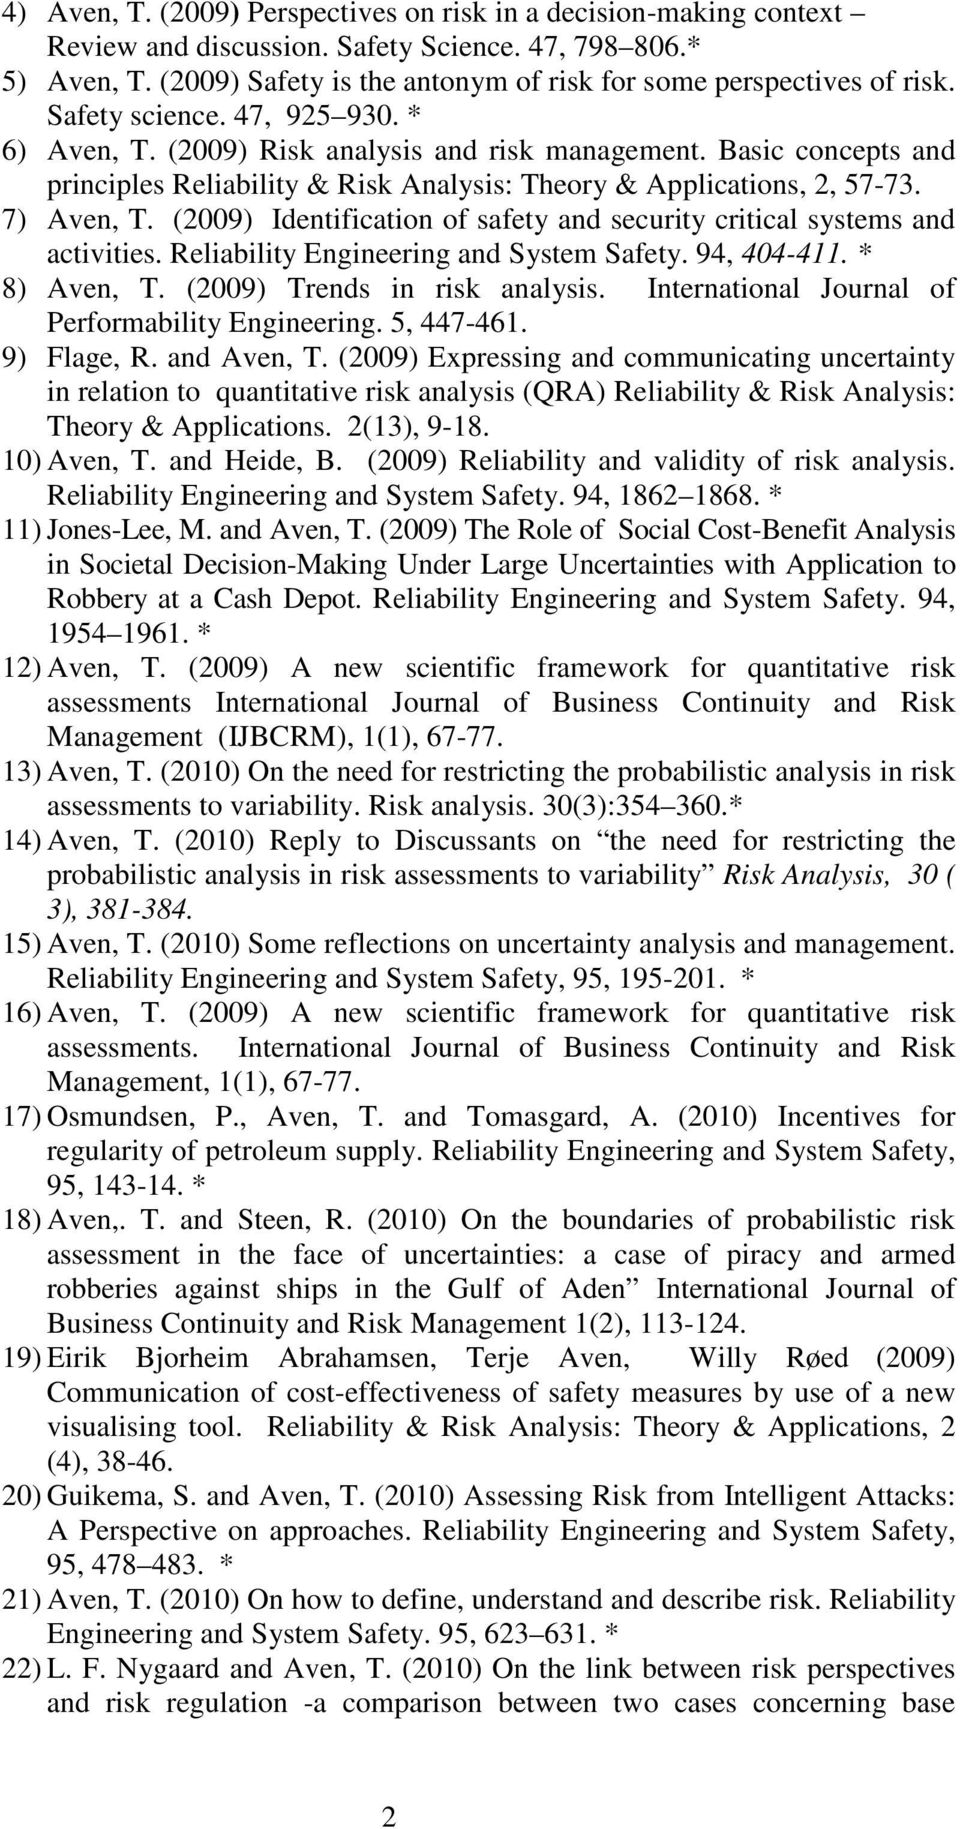 Basic concepts and principles Reliability & Risk Analysis: Theory & Applications, 2, 57-73. 7) Aven, T. (2009) Identification of safety and security critical systems and activities.